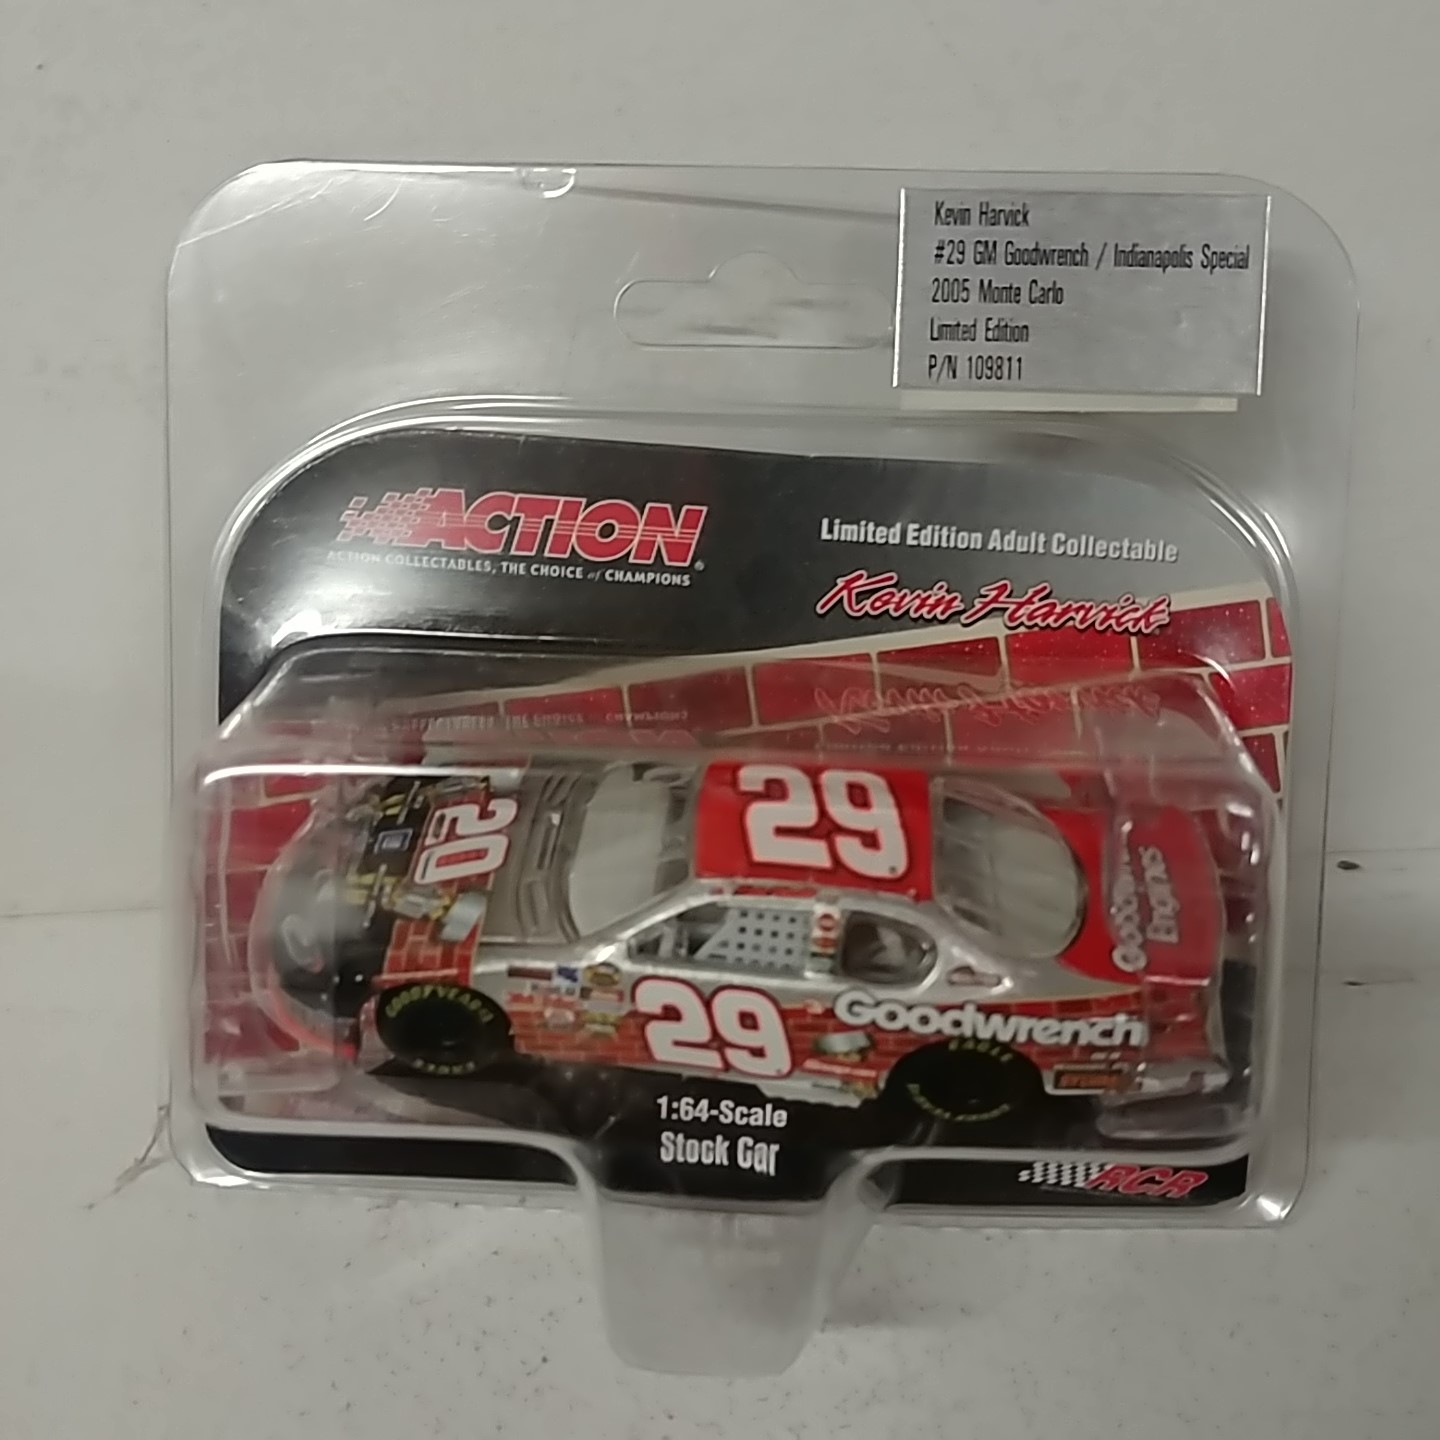 2005 Kevin Harvick 1/64th Goodwrench "Indy Special" AP car